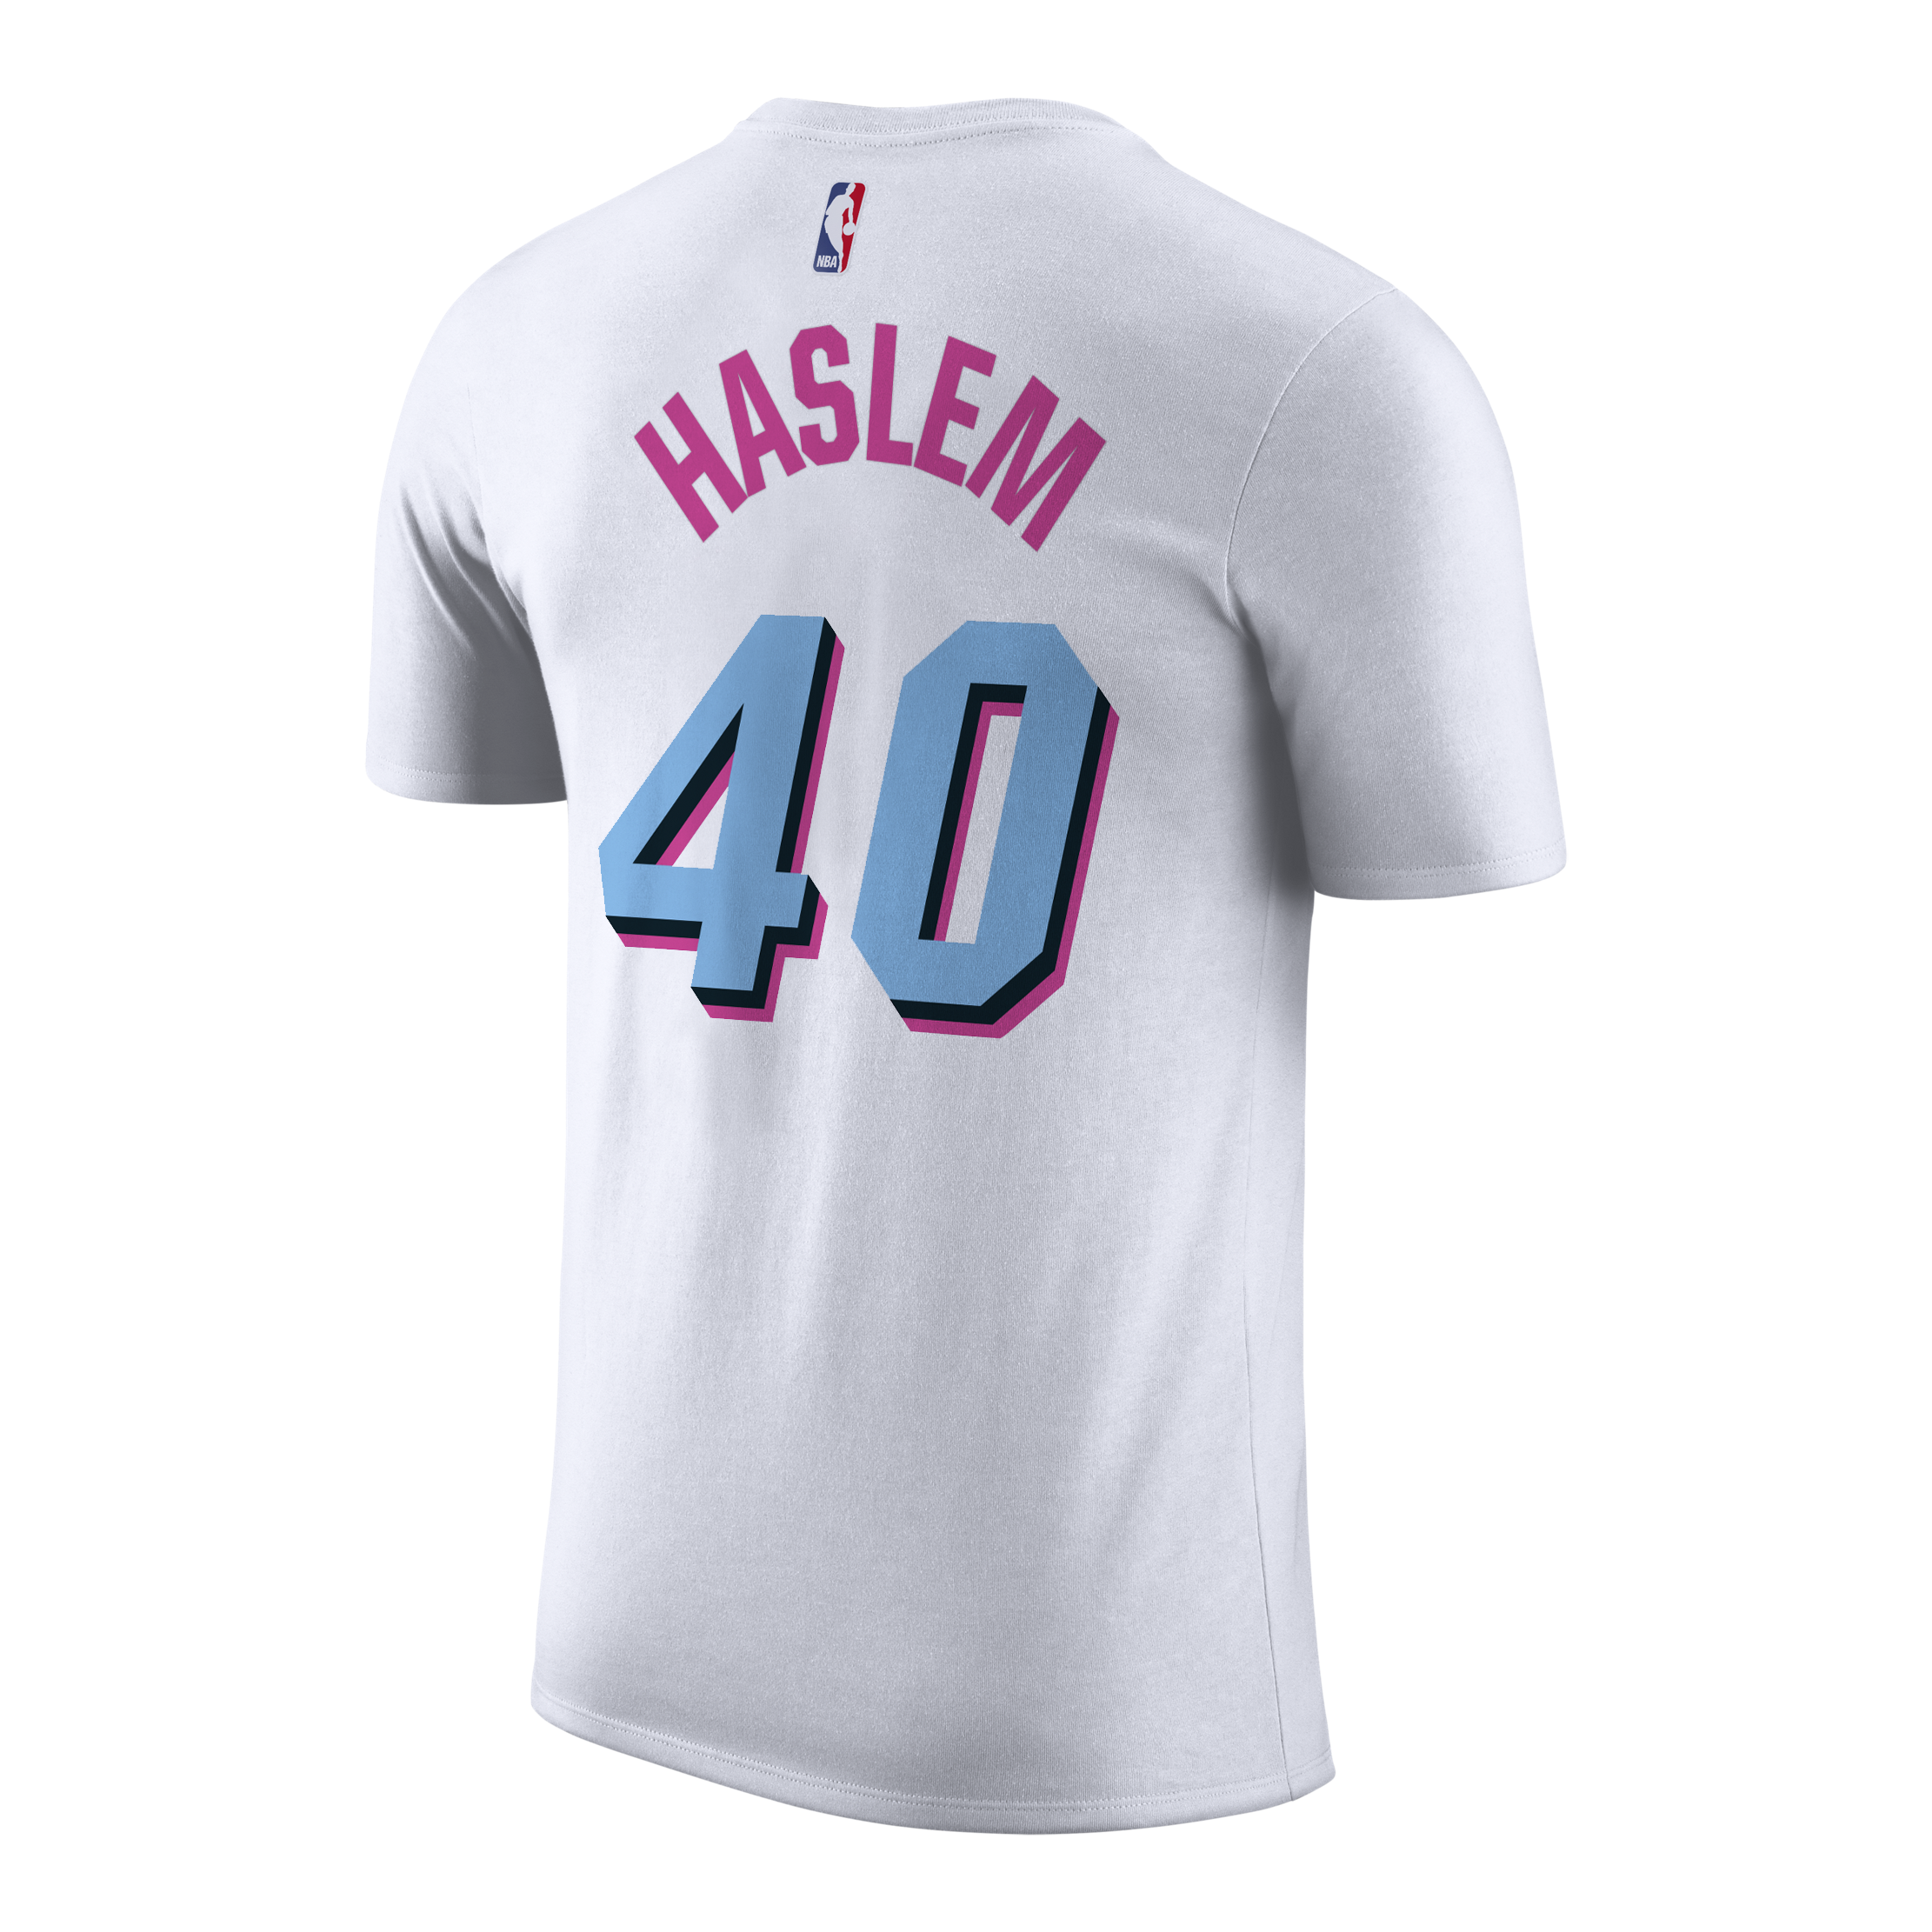 udonis haslem vice jersey